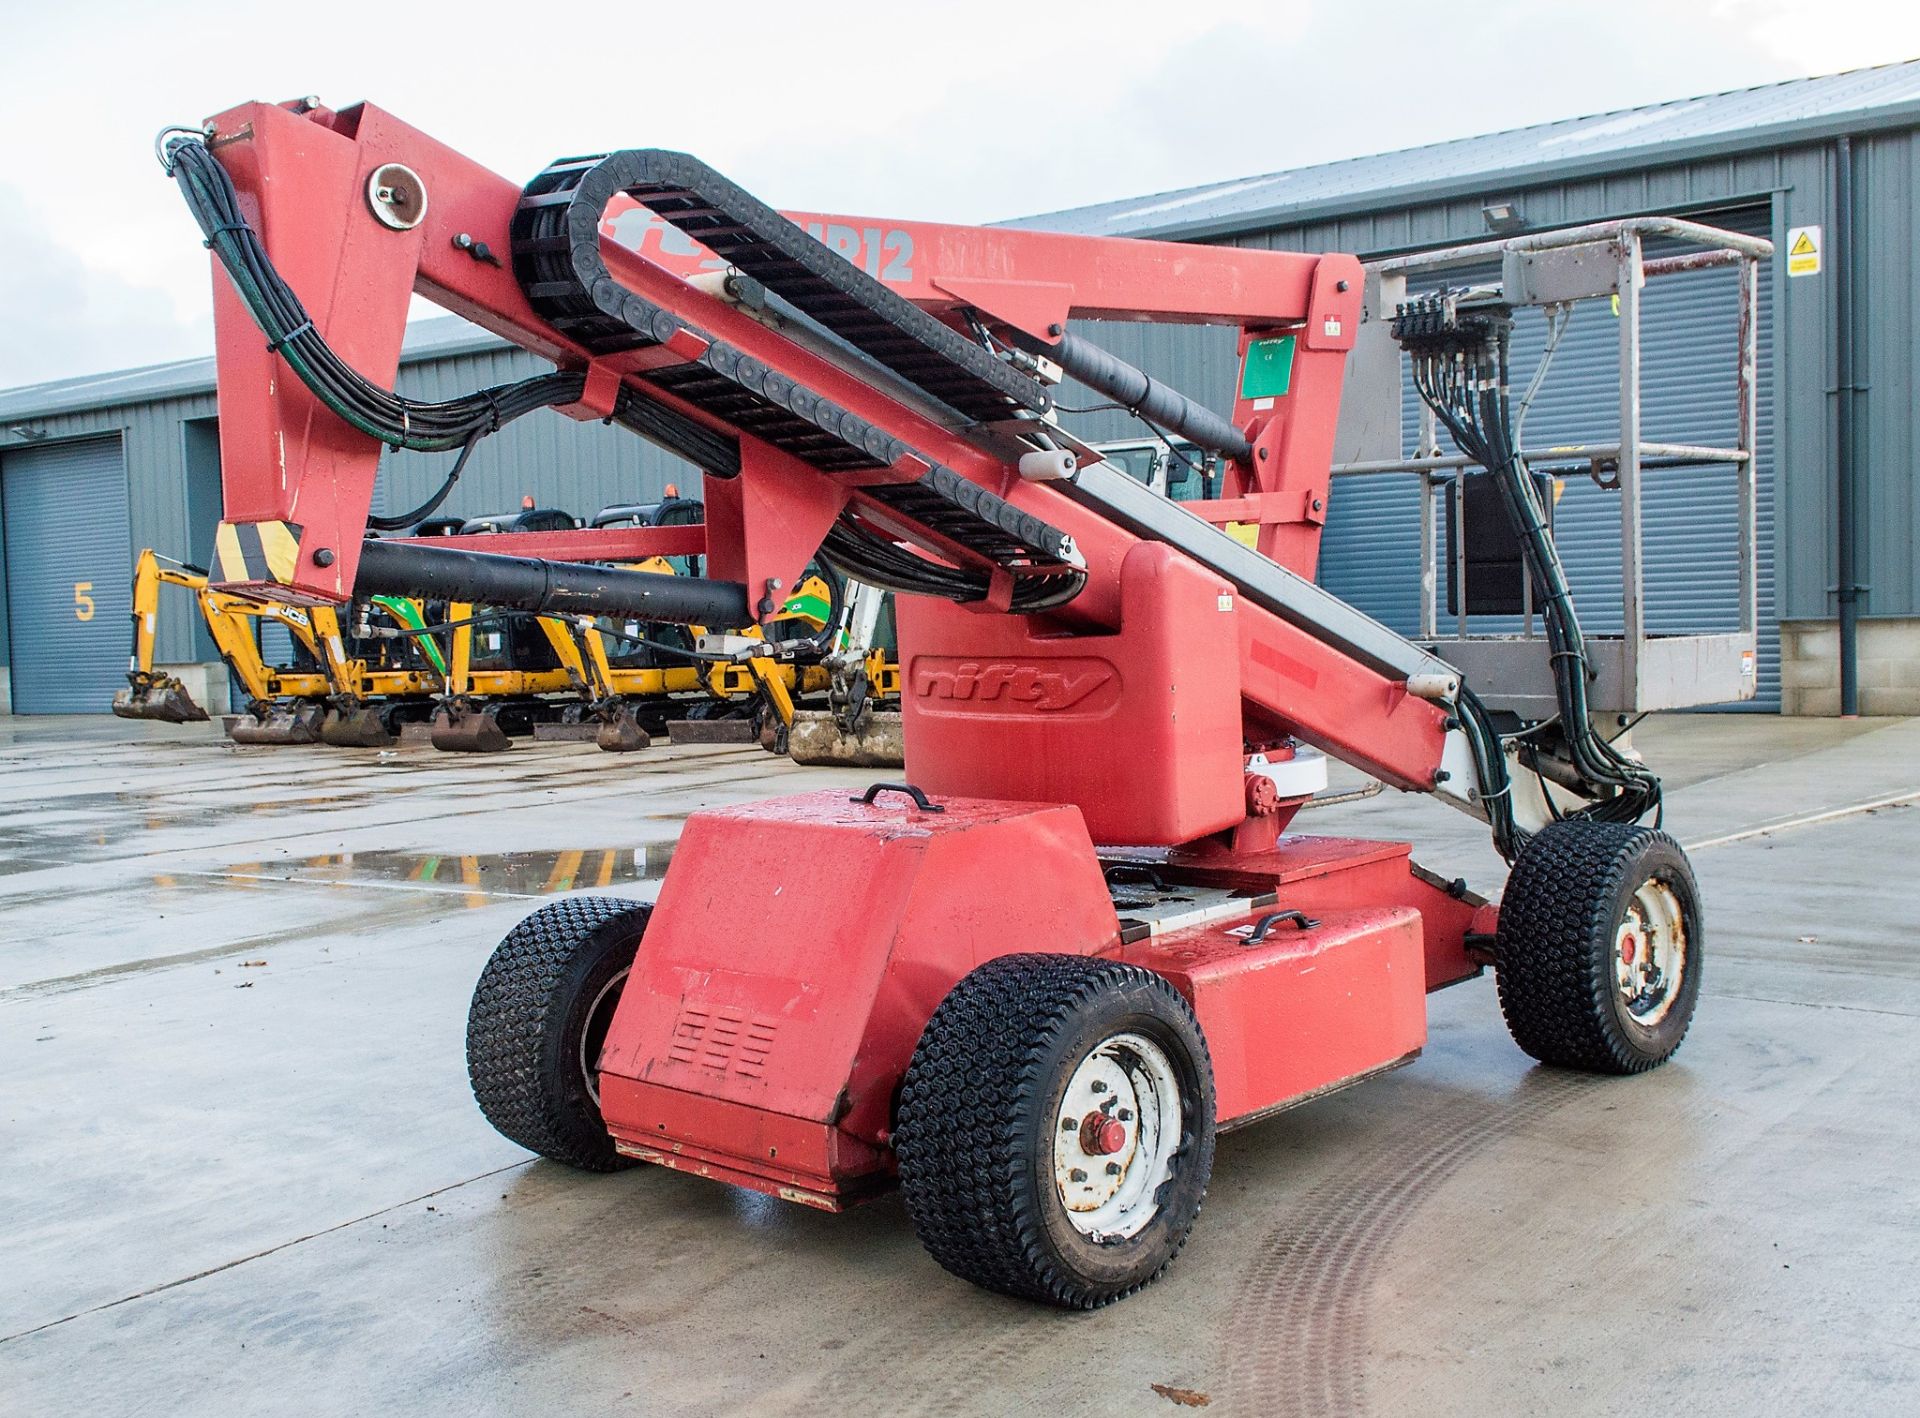 Nifty HR12 battery/diesel articulated boom access platform Year: 2010 S/N: 19297 - Image 3 of 18